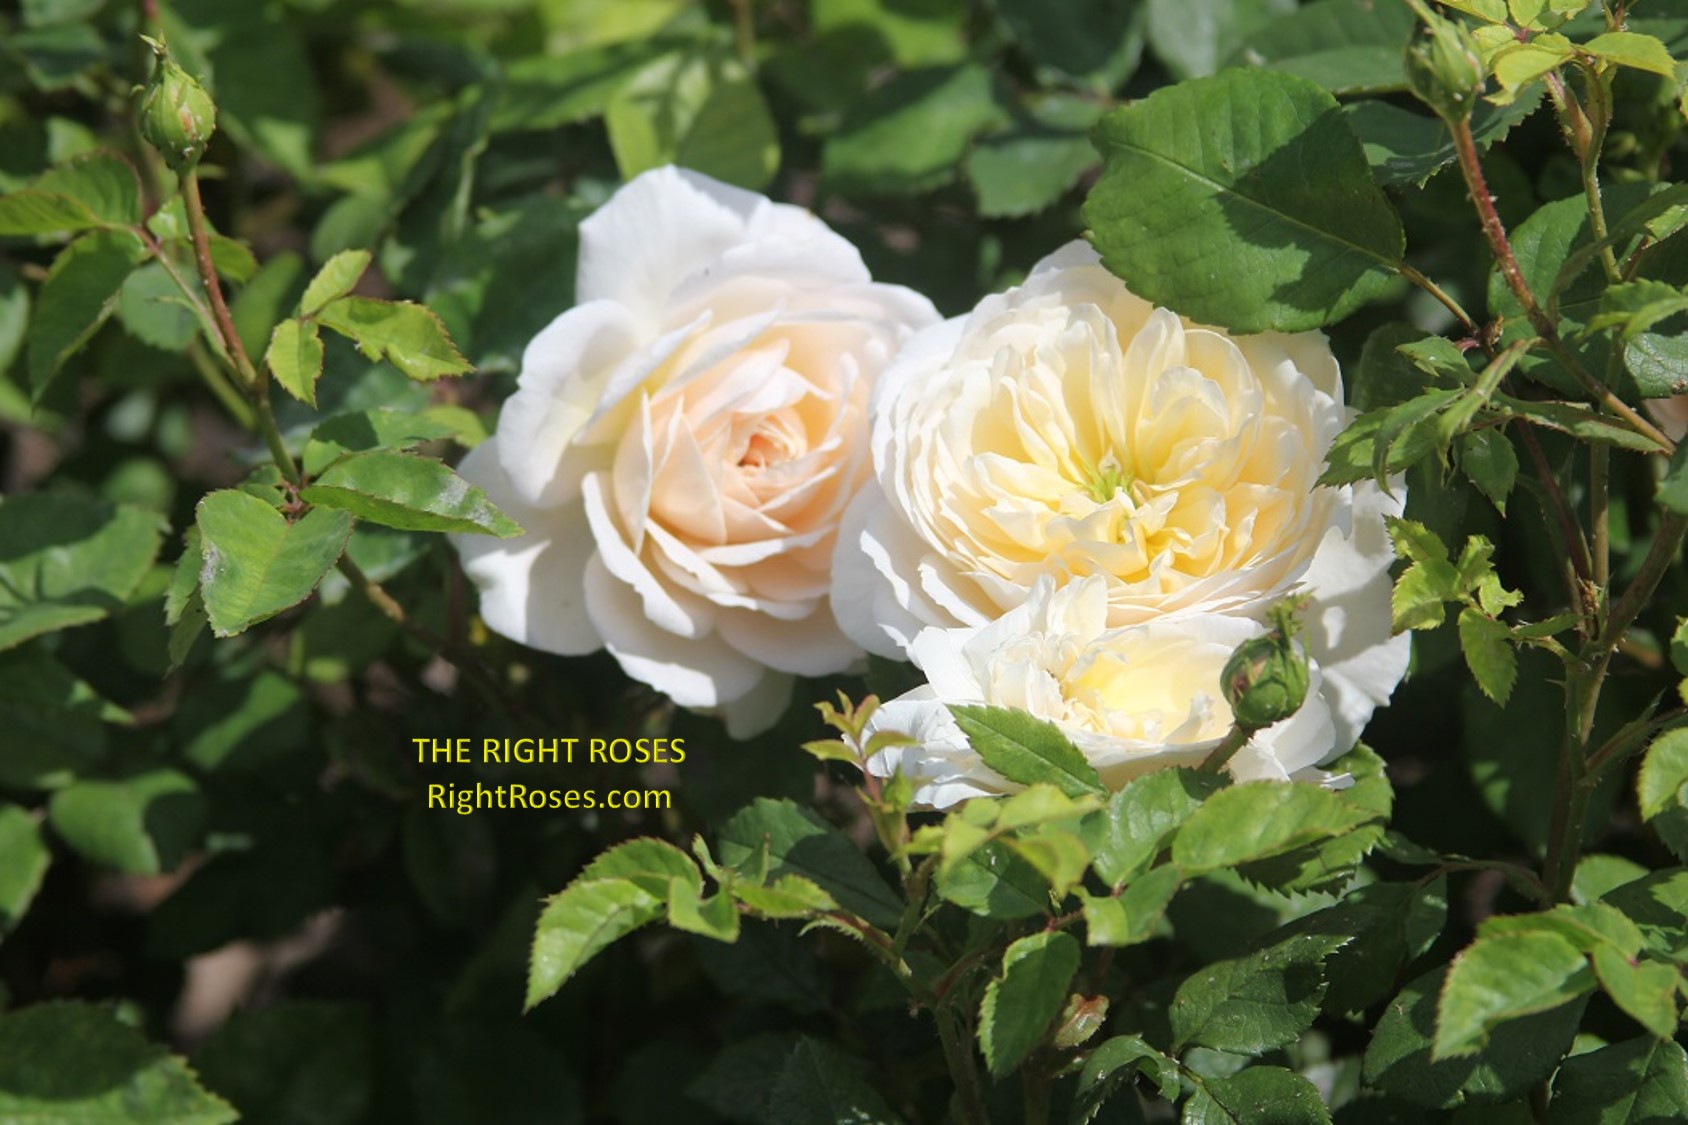 crocus rose review the right roses score best top garden store david austin english roses rose products rose rating the right leap rose food fertilizer